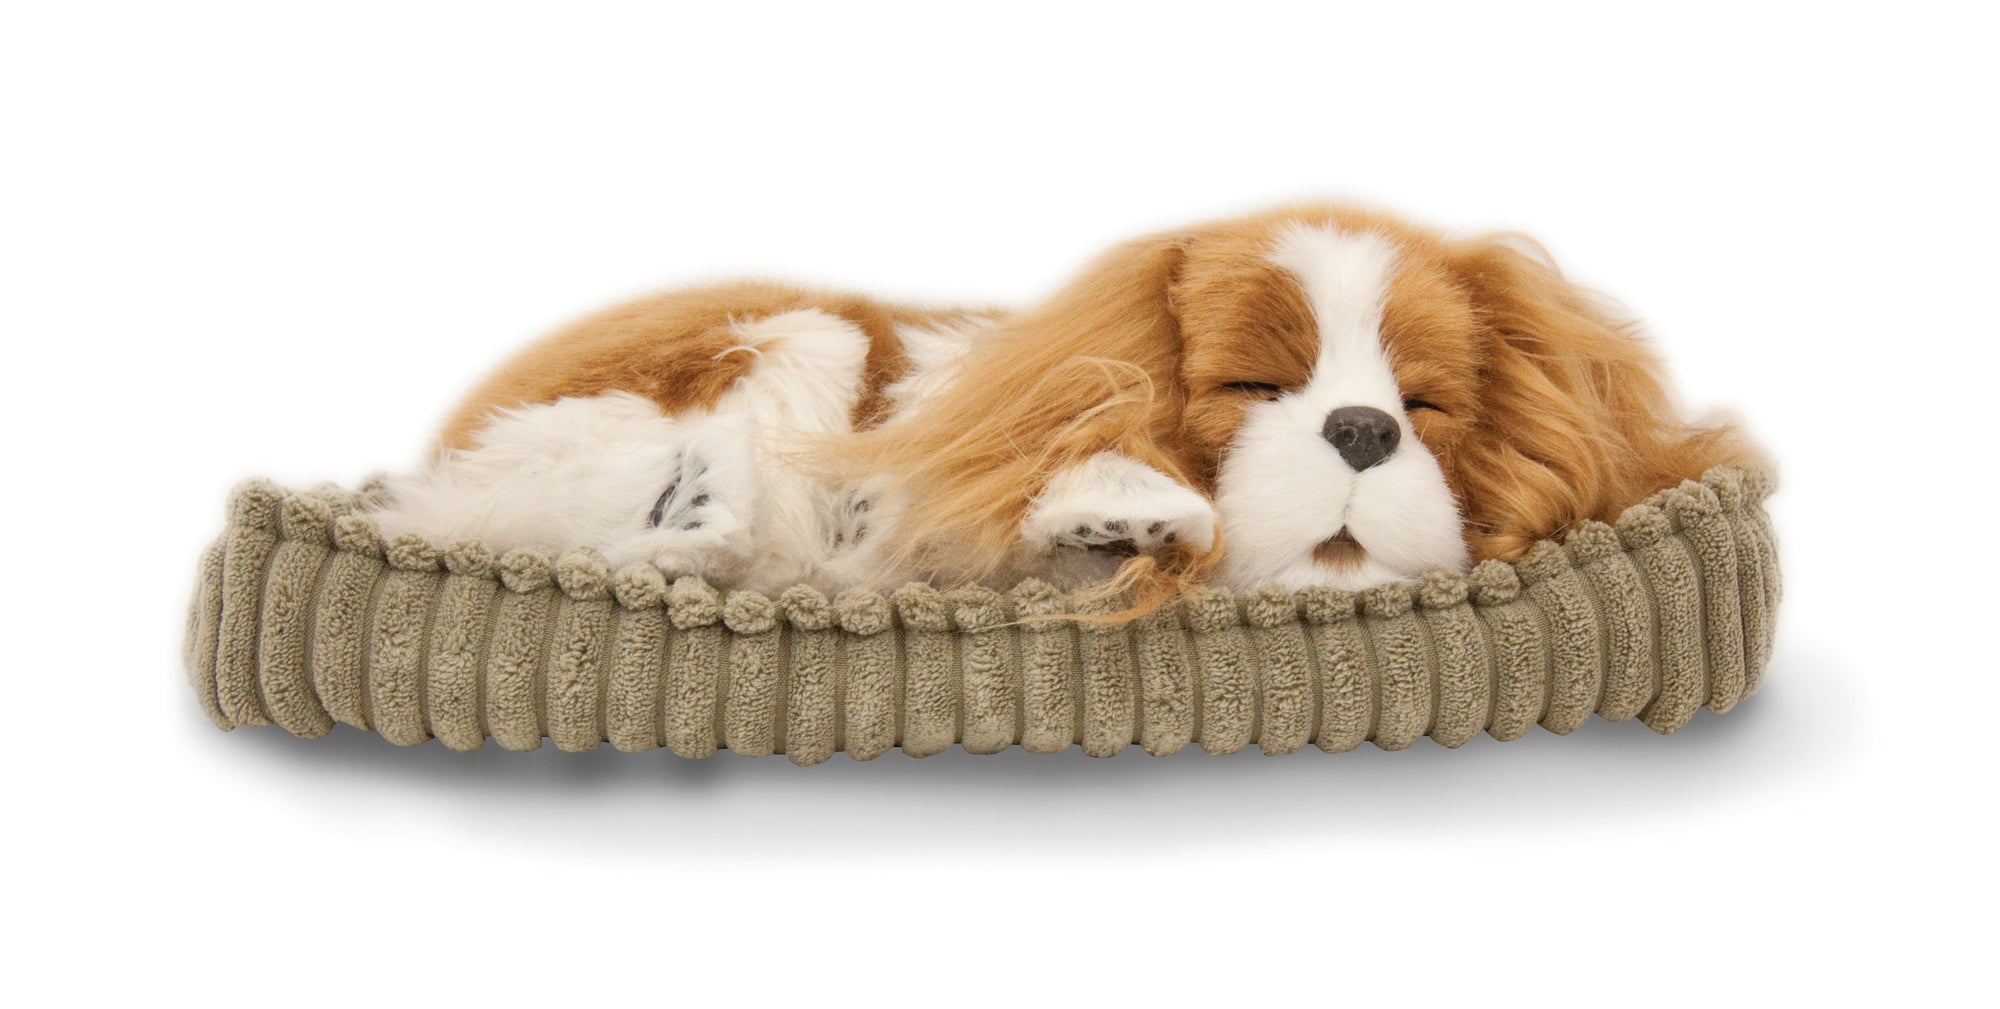 A facsimile tan and white King Charles cavalier spaniel dog is curled up asleep on a light brown pet bed made of corduroy-style material. The dog is facing us so that its  sleeping face is fully visible